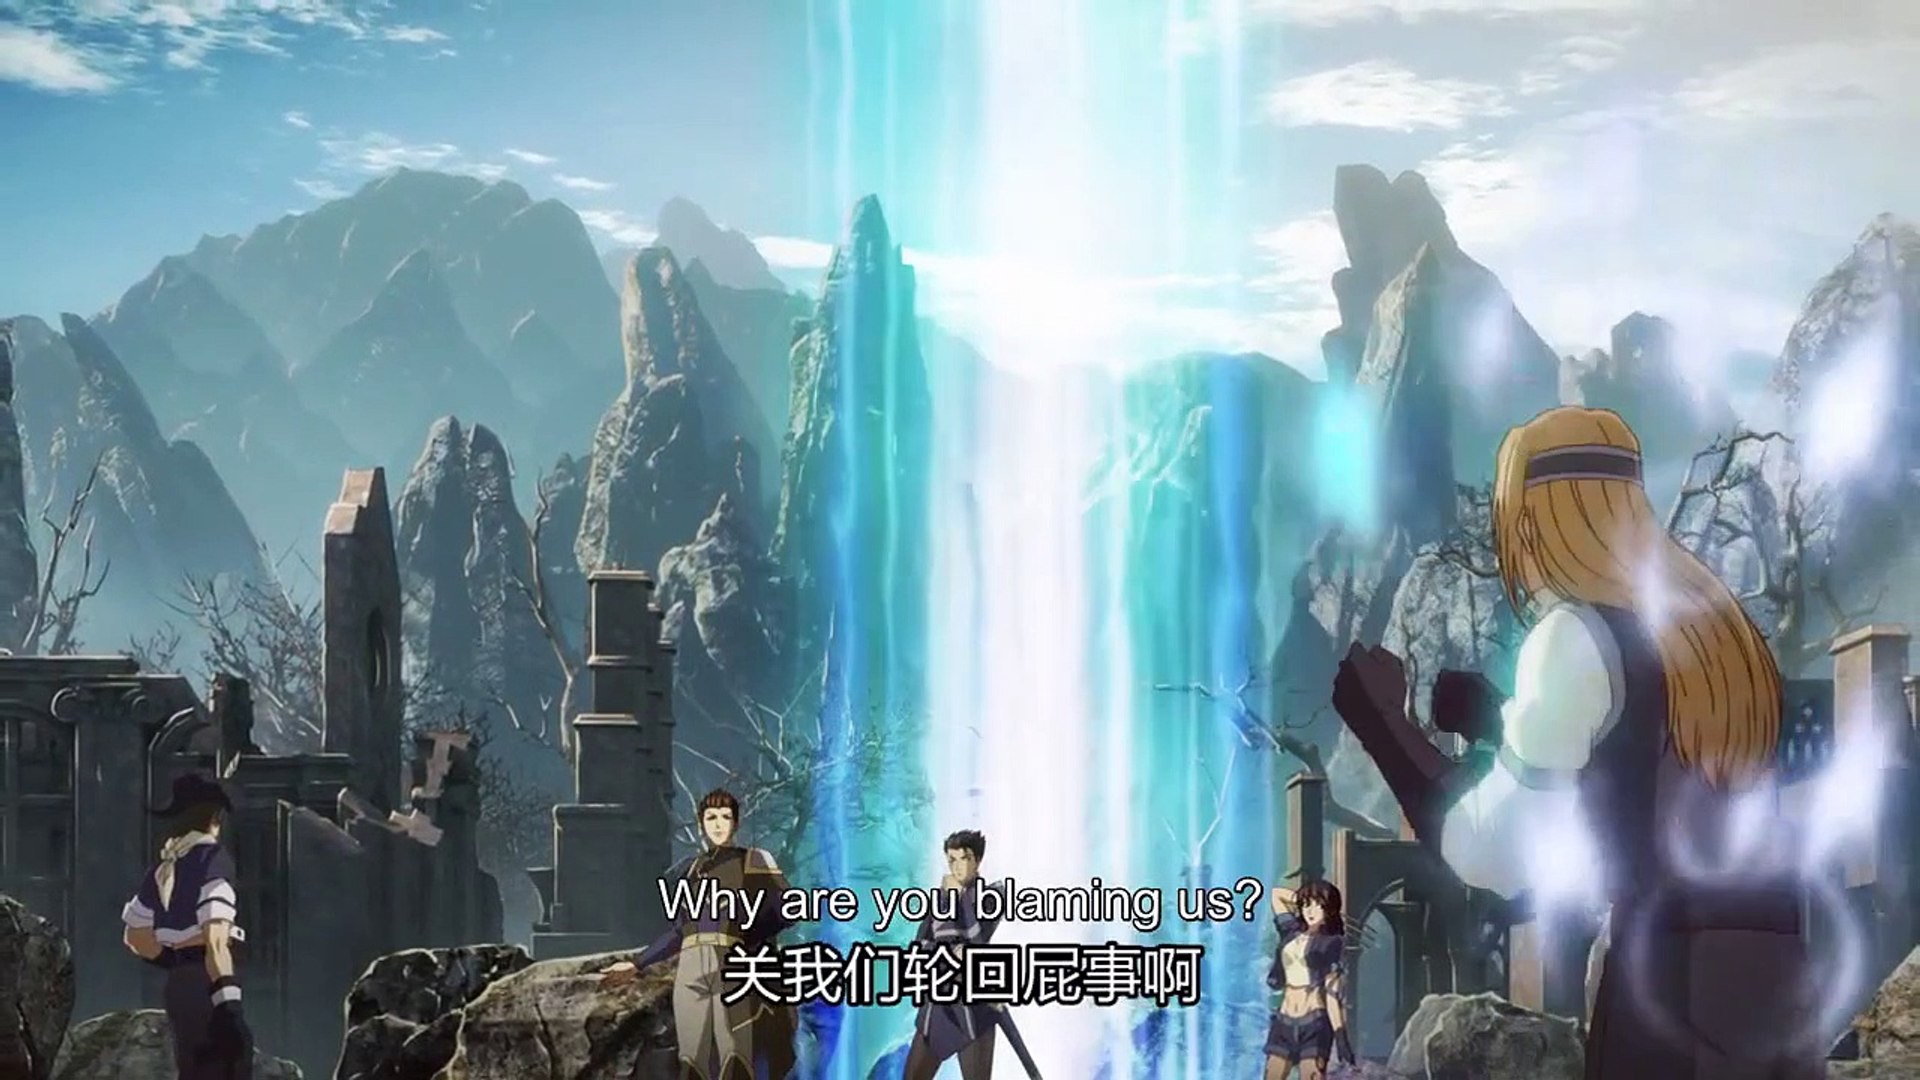 Quan Zhi Gao Shou (The King's Avatar) 全职高手之巅峰荣耀 :For the Glory Animated  Movie Trailer 2 - Vídeo Dailymotion